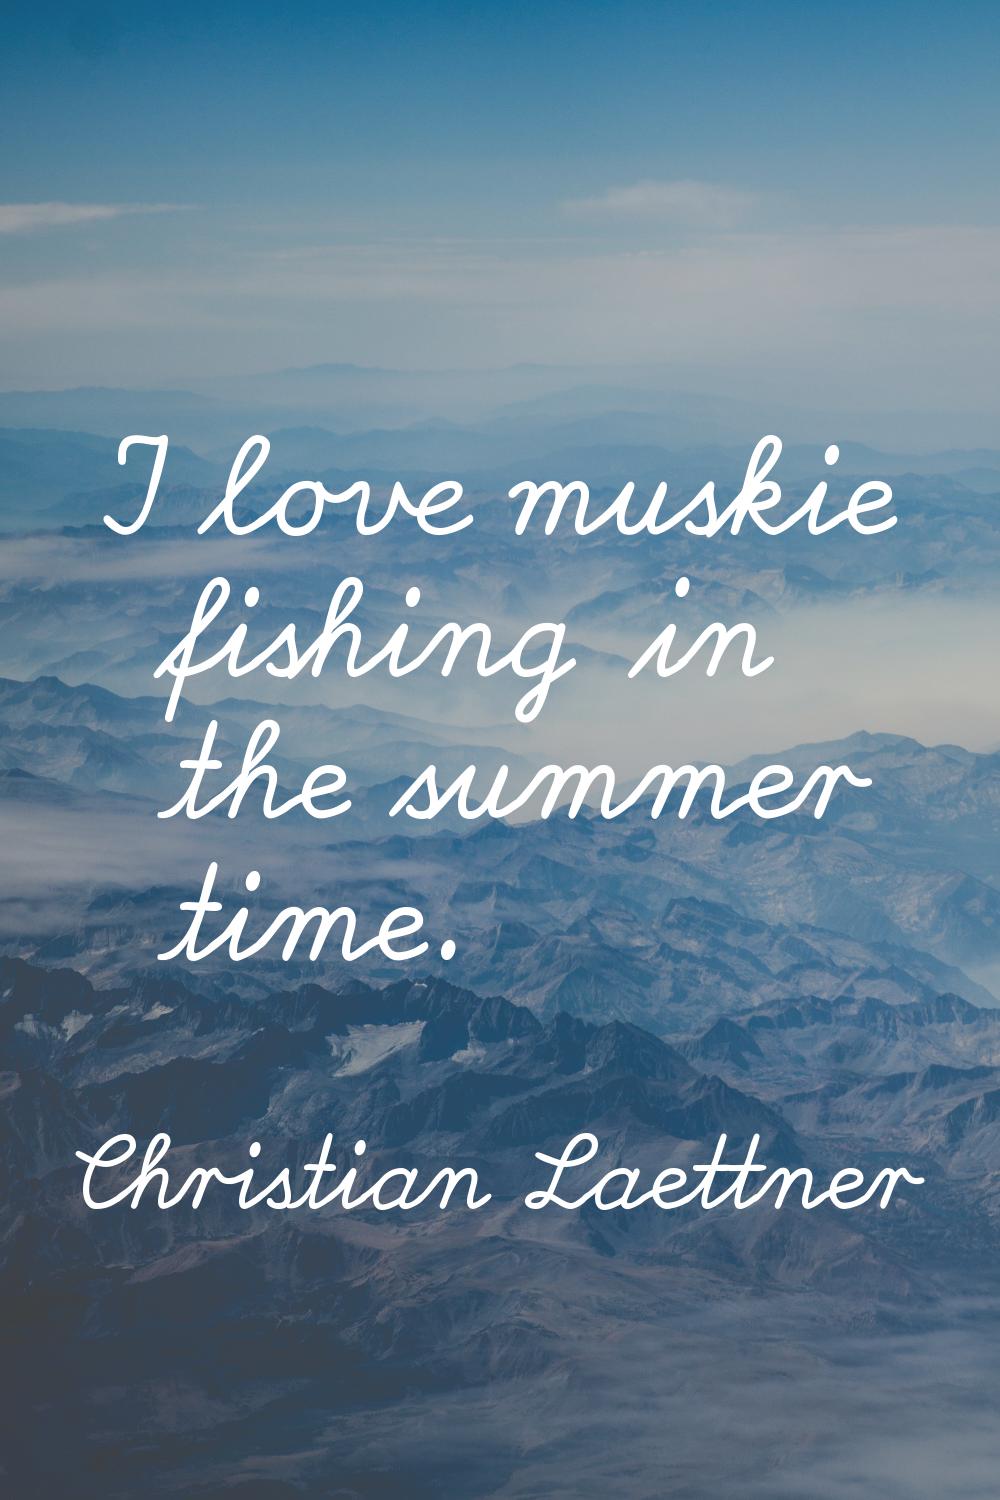 I love muskie fishing in the summer time.